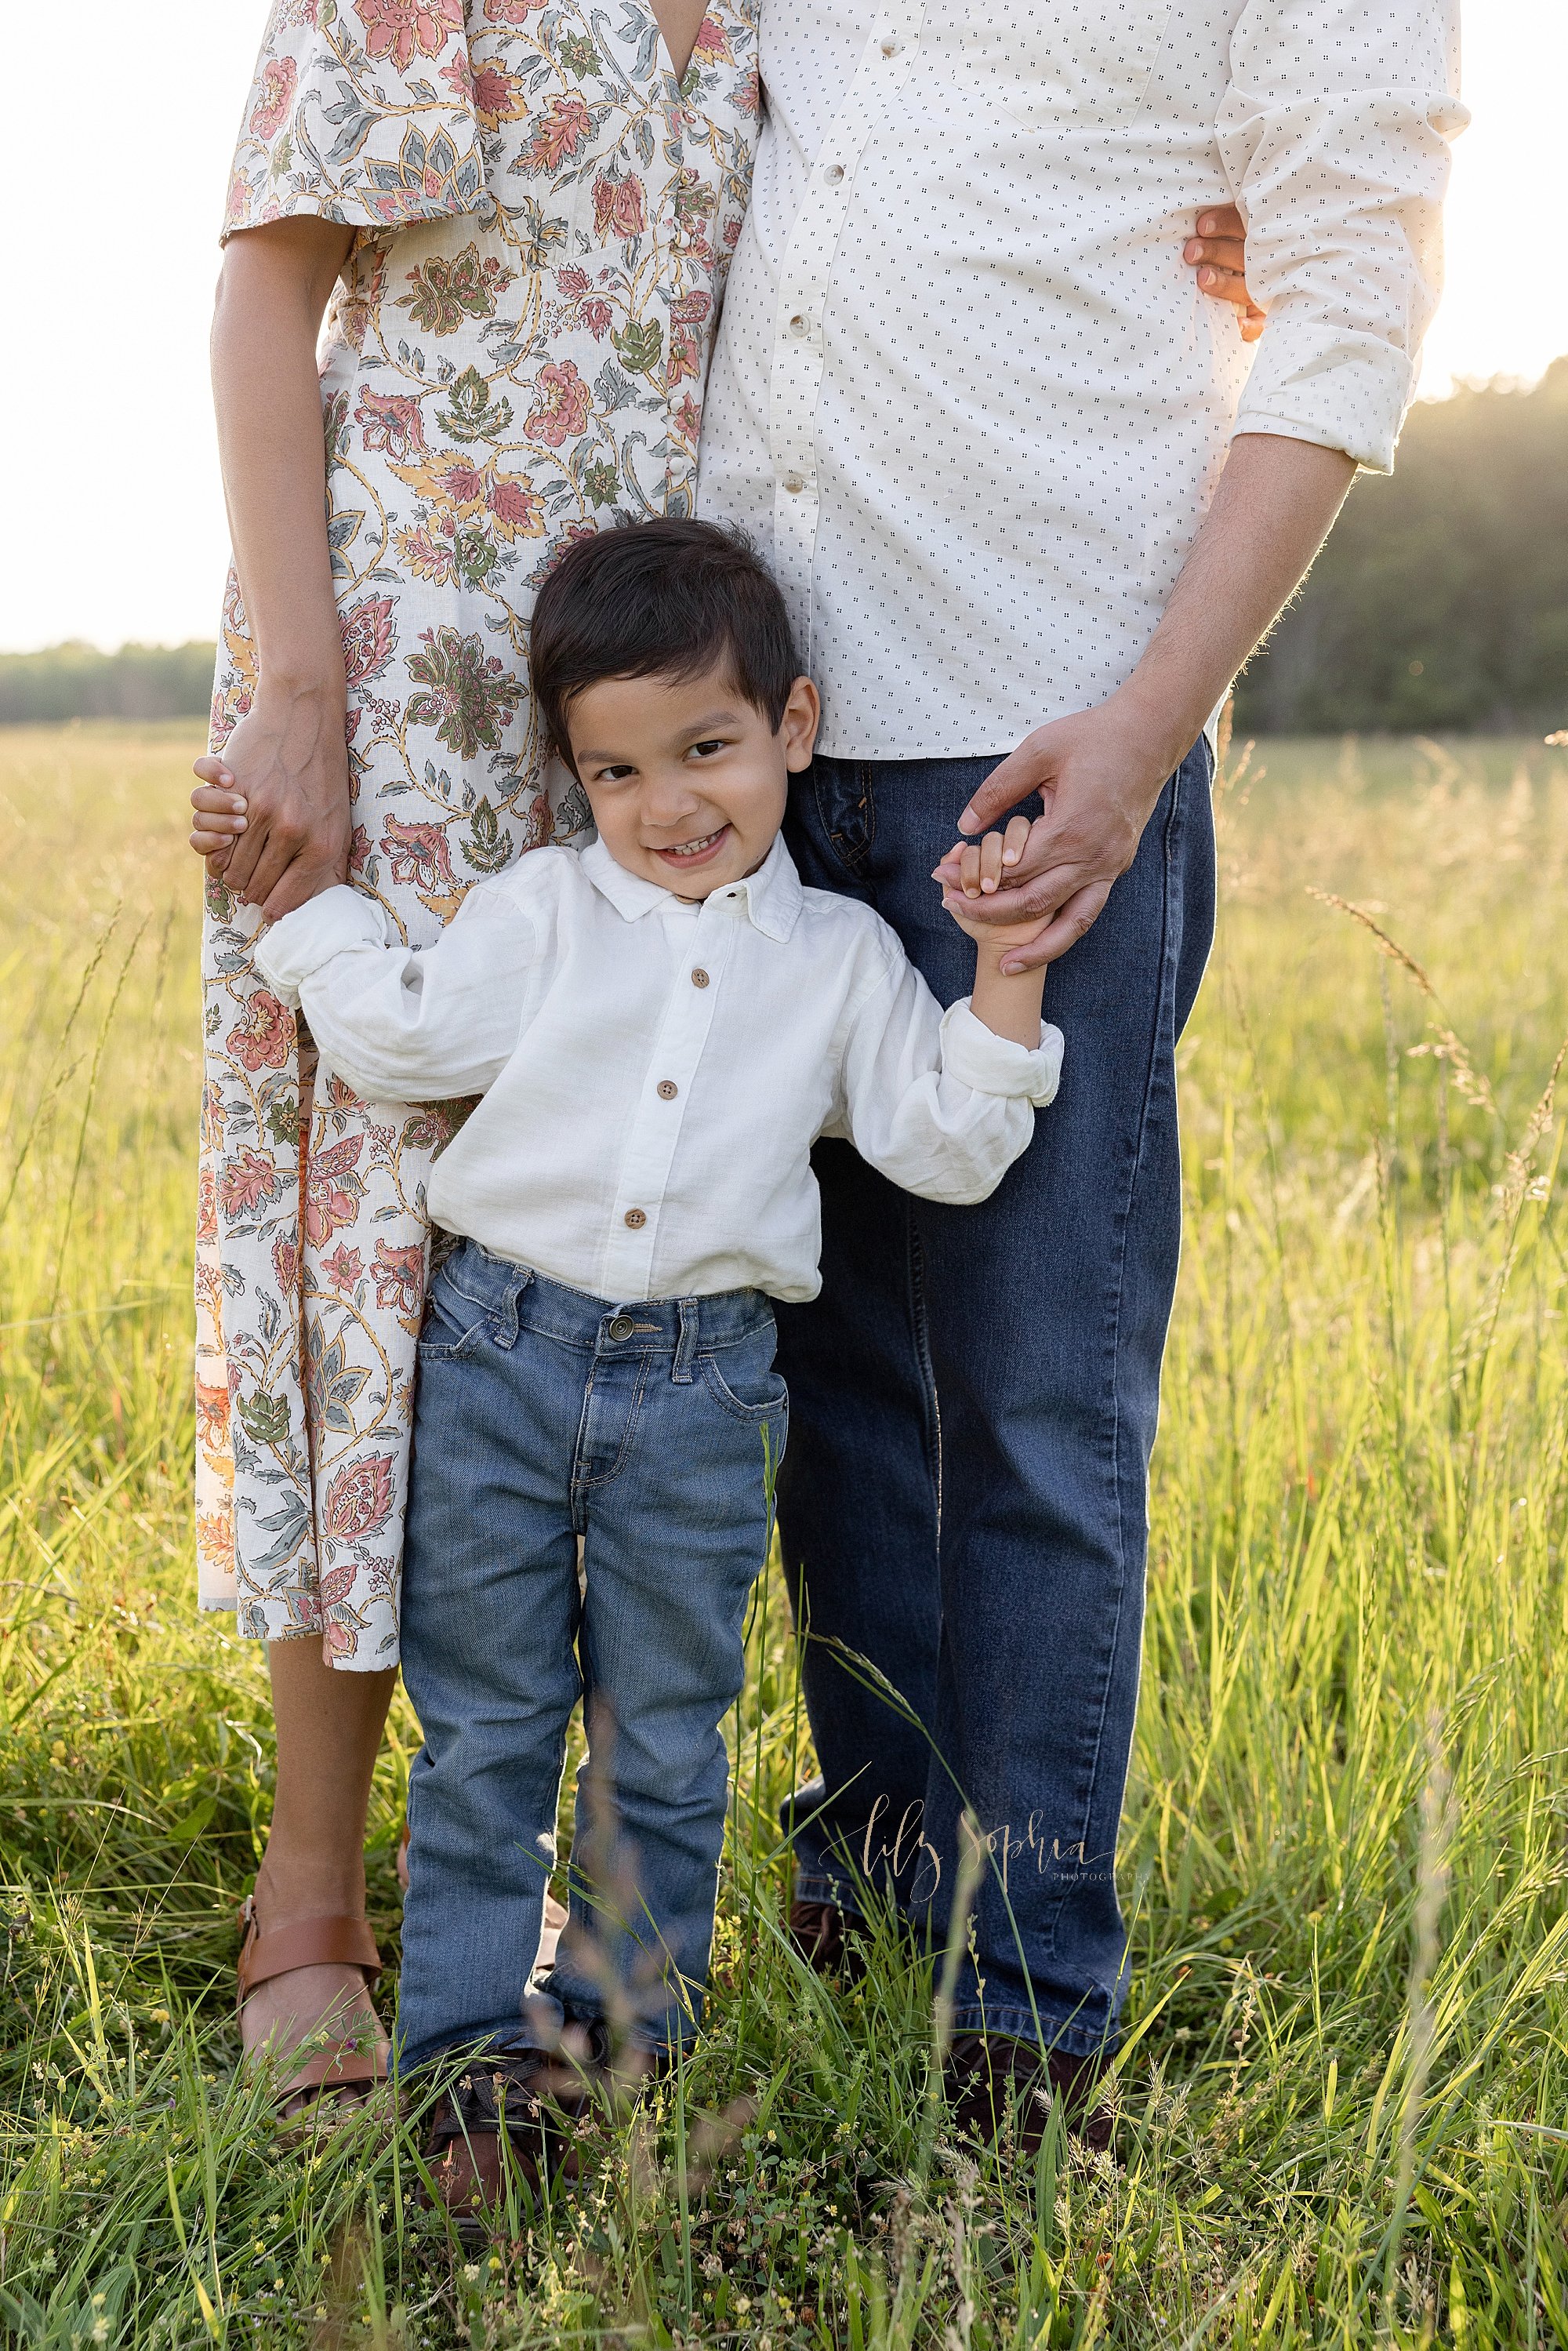  Family photo of a toddler boy standing in front of his mother and father as he holds each of their hands at sunset in an Atlanta, Georgia field. 